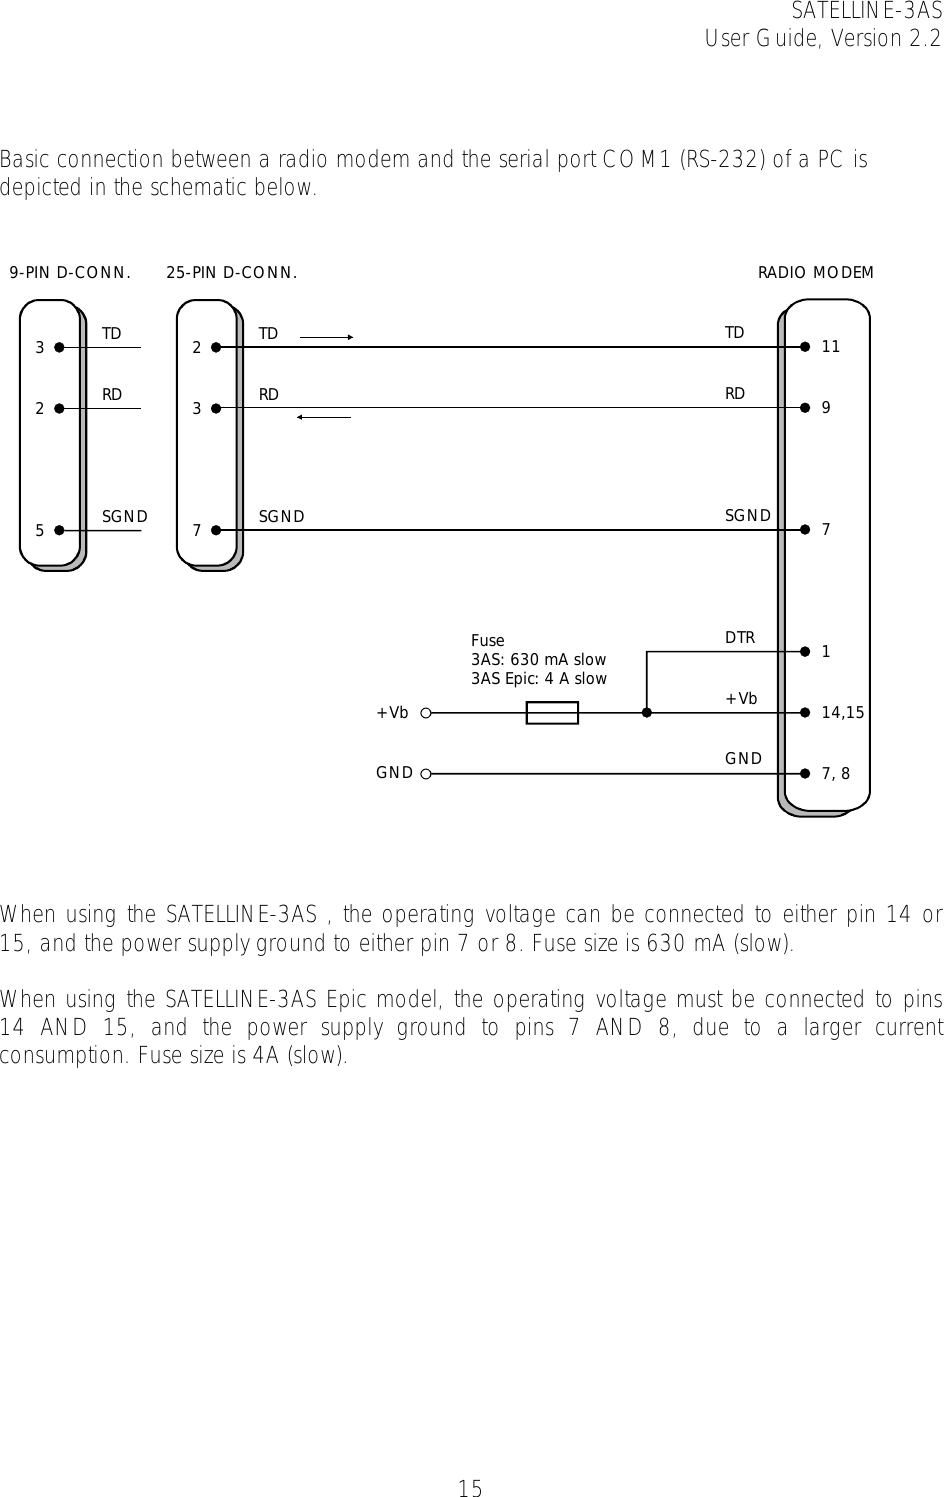 SATELLINE-3AS User Guide, Version 2.2   15   Basic connection between a radio modem and the serial port COM1 (RS-232) of a PC is depicted in the schematic below.      When using the SATELLINE-3AS , the operating voltage can be connected to either pin 14 or 15, and the power supply ground to either pin 7 or 8. Fuse size is 630 mA (slow).  When using the SATELLINE-3AS Epic model, the operating voltage must be connected to pins 14 AND 15, and the power supply ground to pins 7 AND 8, due to a larger current consumption. Fuse size is 4A (slow).    325TDRDSGND9-PIN D-CONN.237TDRDSGND25-PIN D-CONN.TDRDSGND11RADIO MODEM97114,157, 8DTR+VbGNDFuse 3AS: 630 mA slow3AS Epic: 4 A slow+VbGND